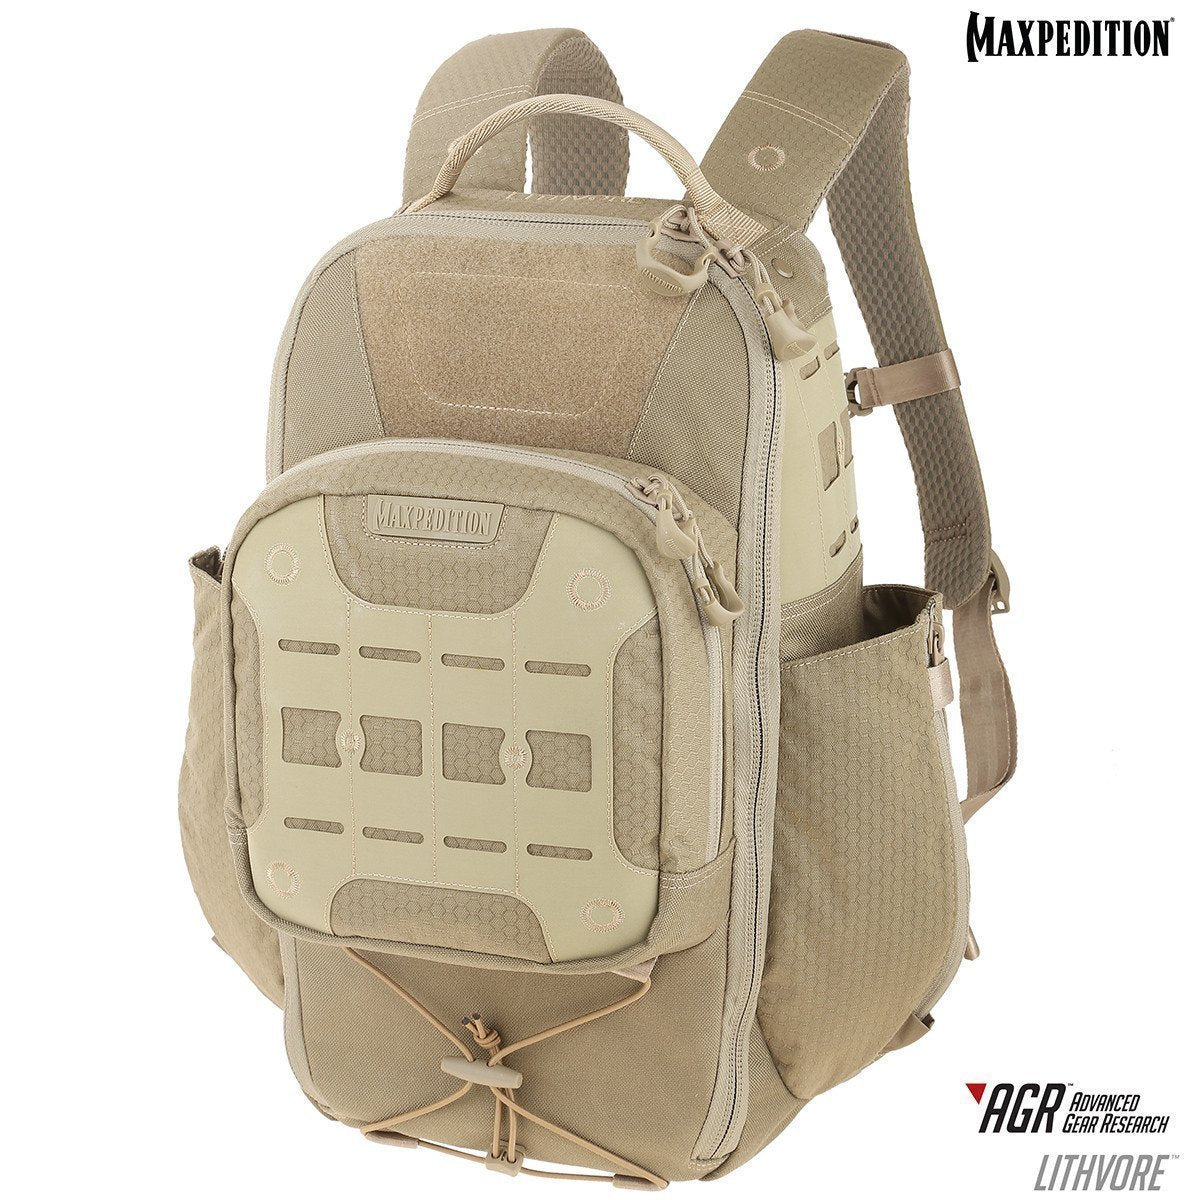 Maxpedition Lithvore Everyday Backpack 17L Backpacks Maxpedition Tan Tactical Gear Supplier Tactical Distributors Australia